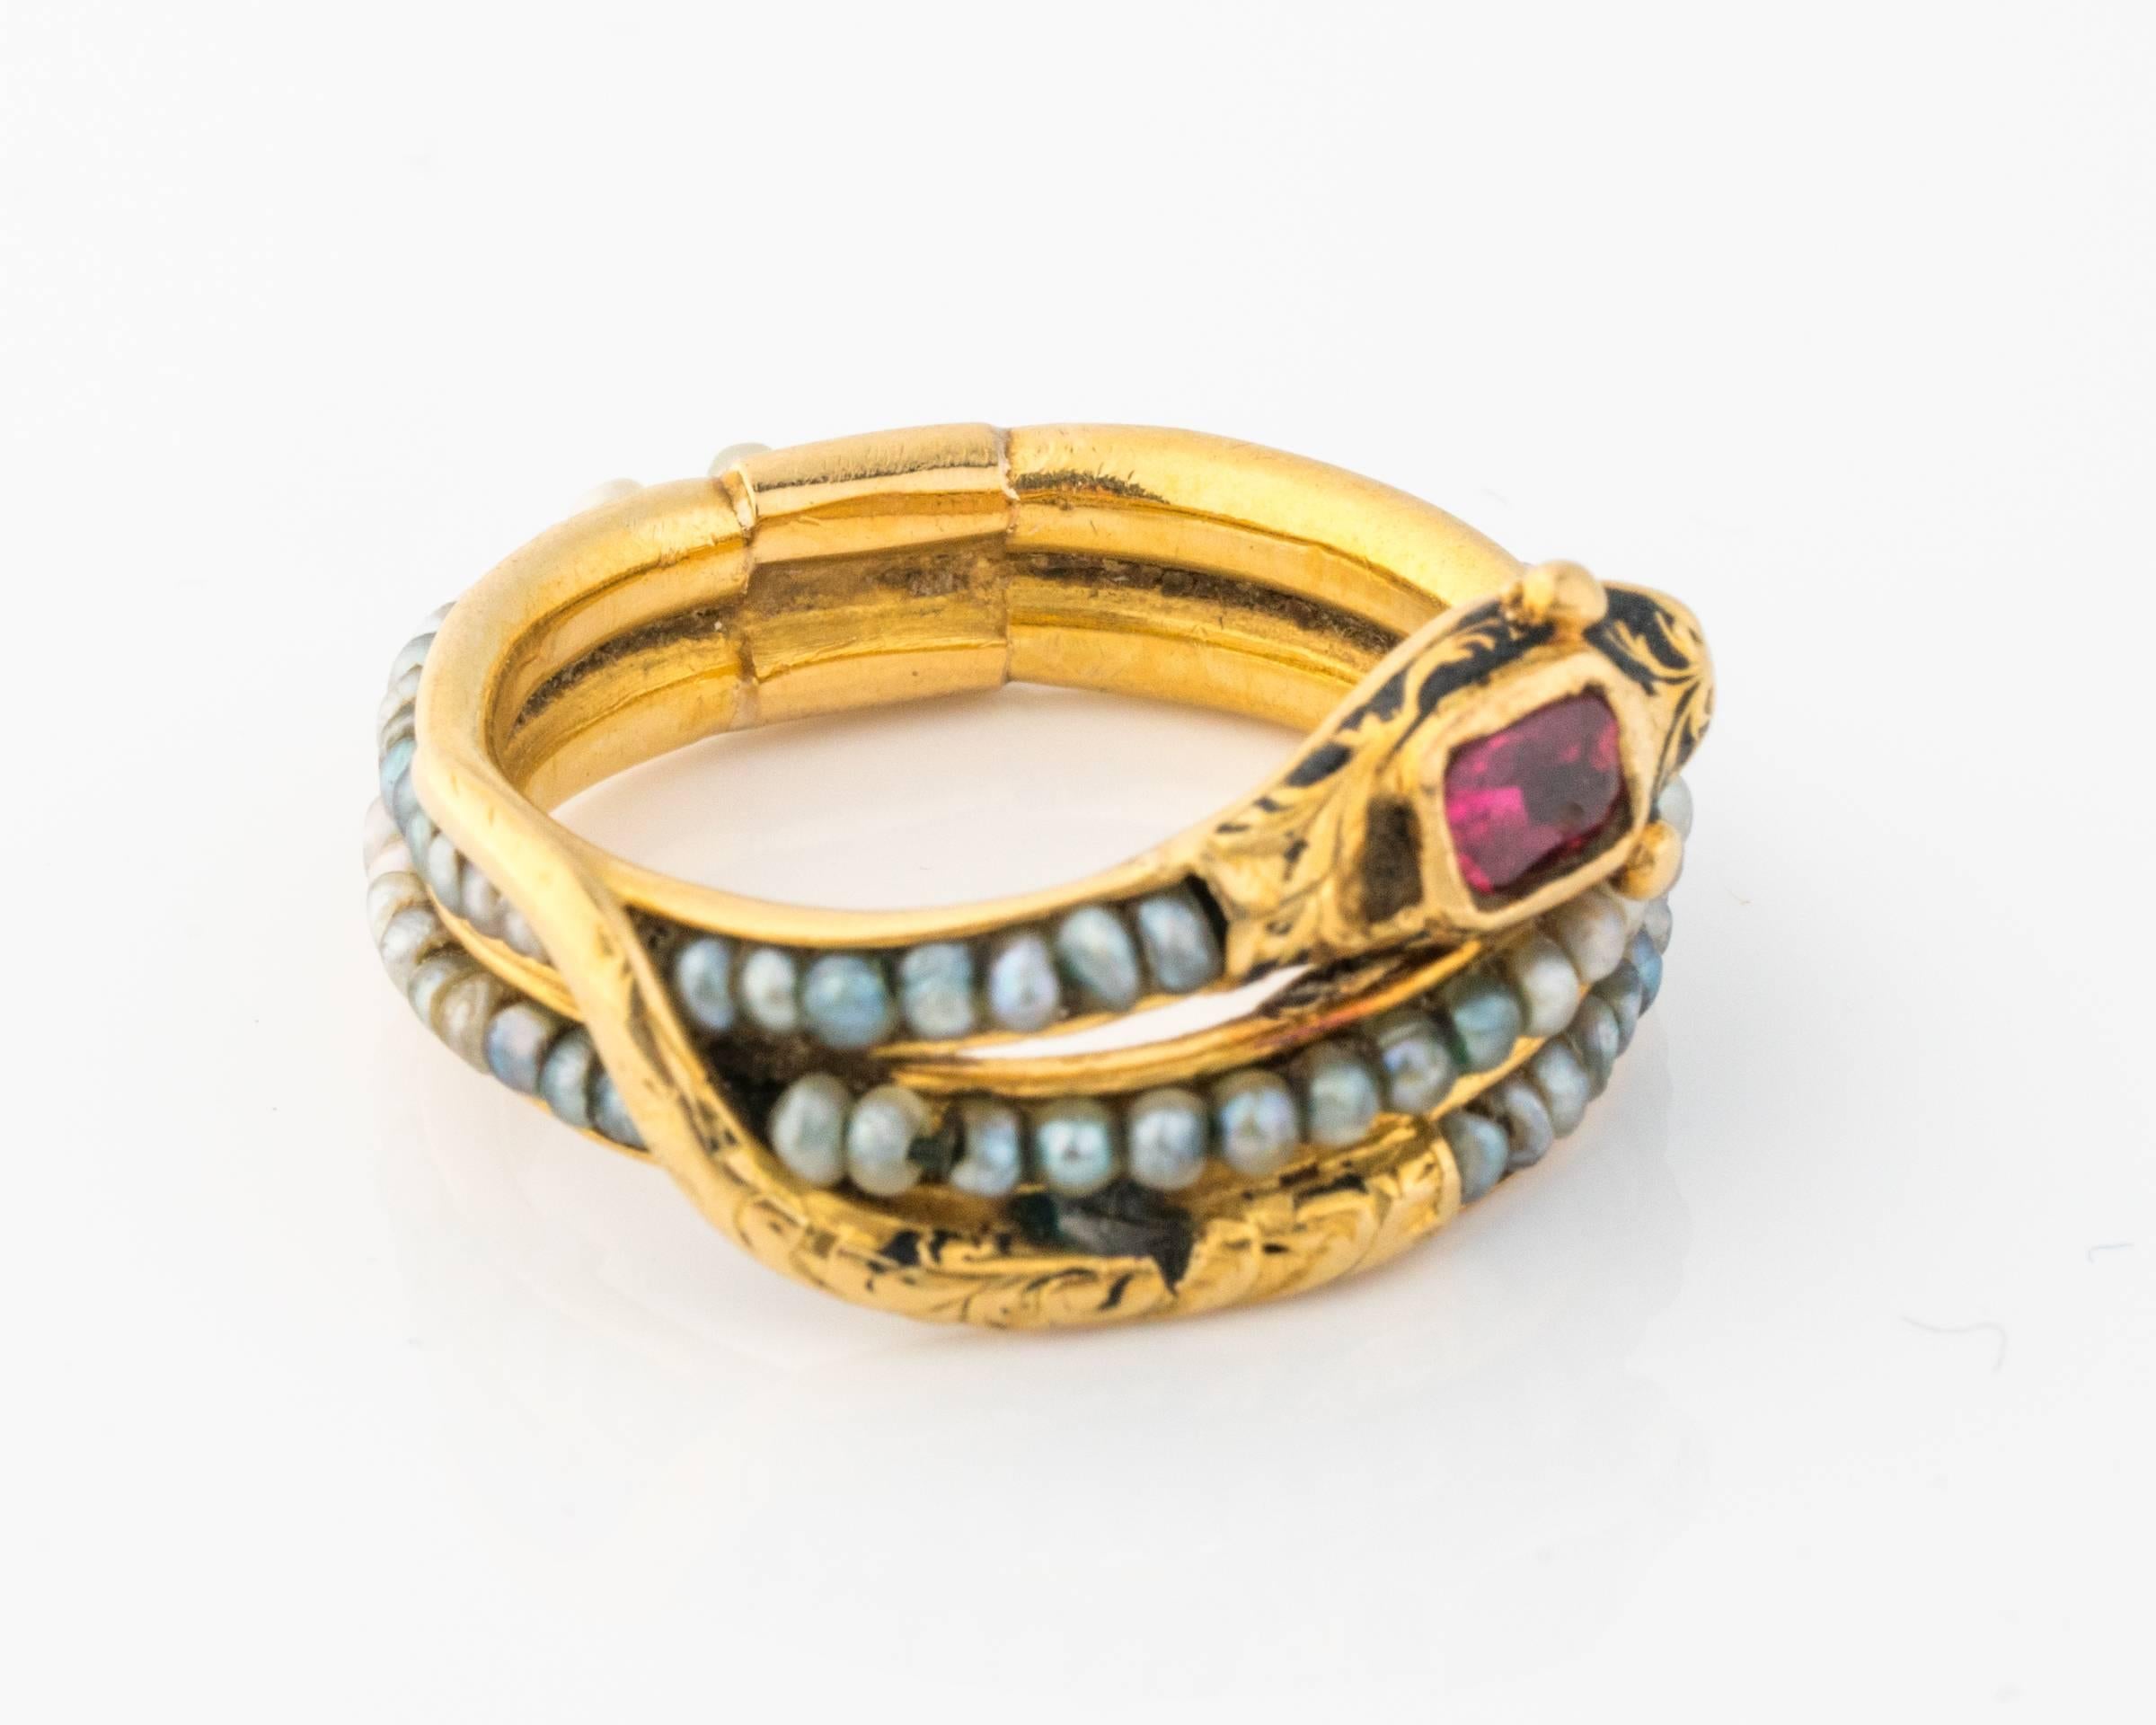 Very unusual mourning ring from circa 1882, celebrating the life of an individual named Jane Gordon. The ring has an inscription behind the Serpent head that reads: 